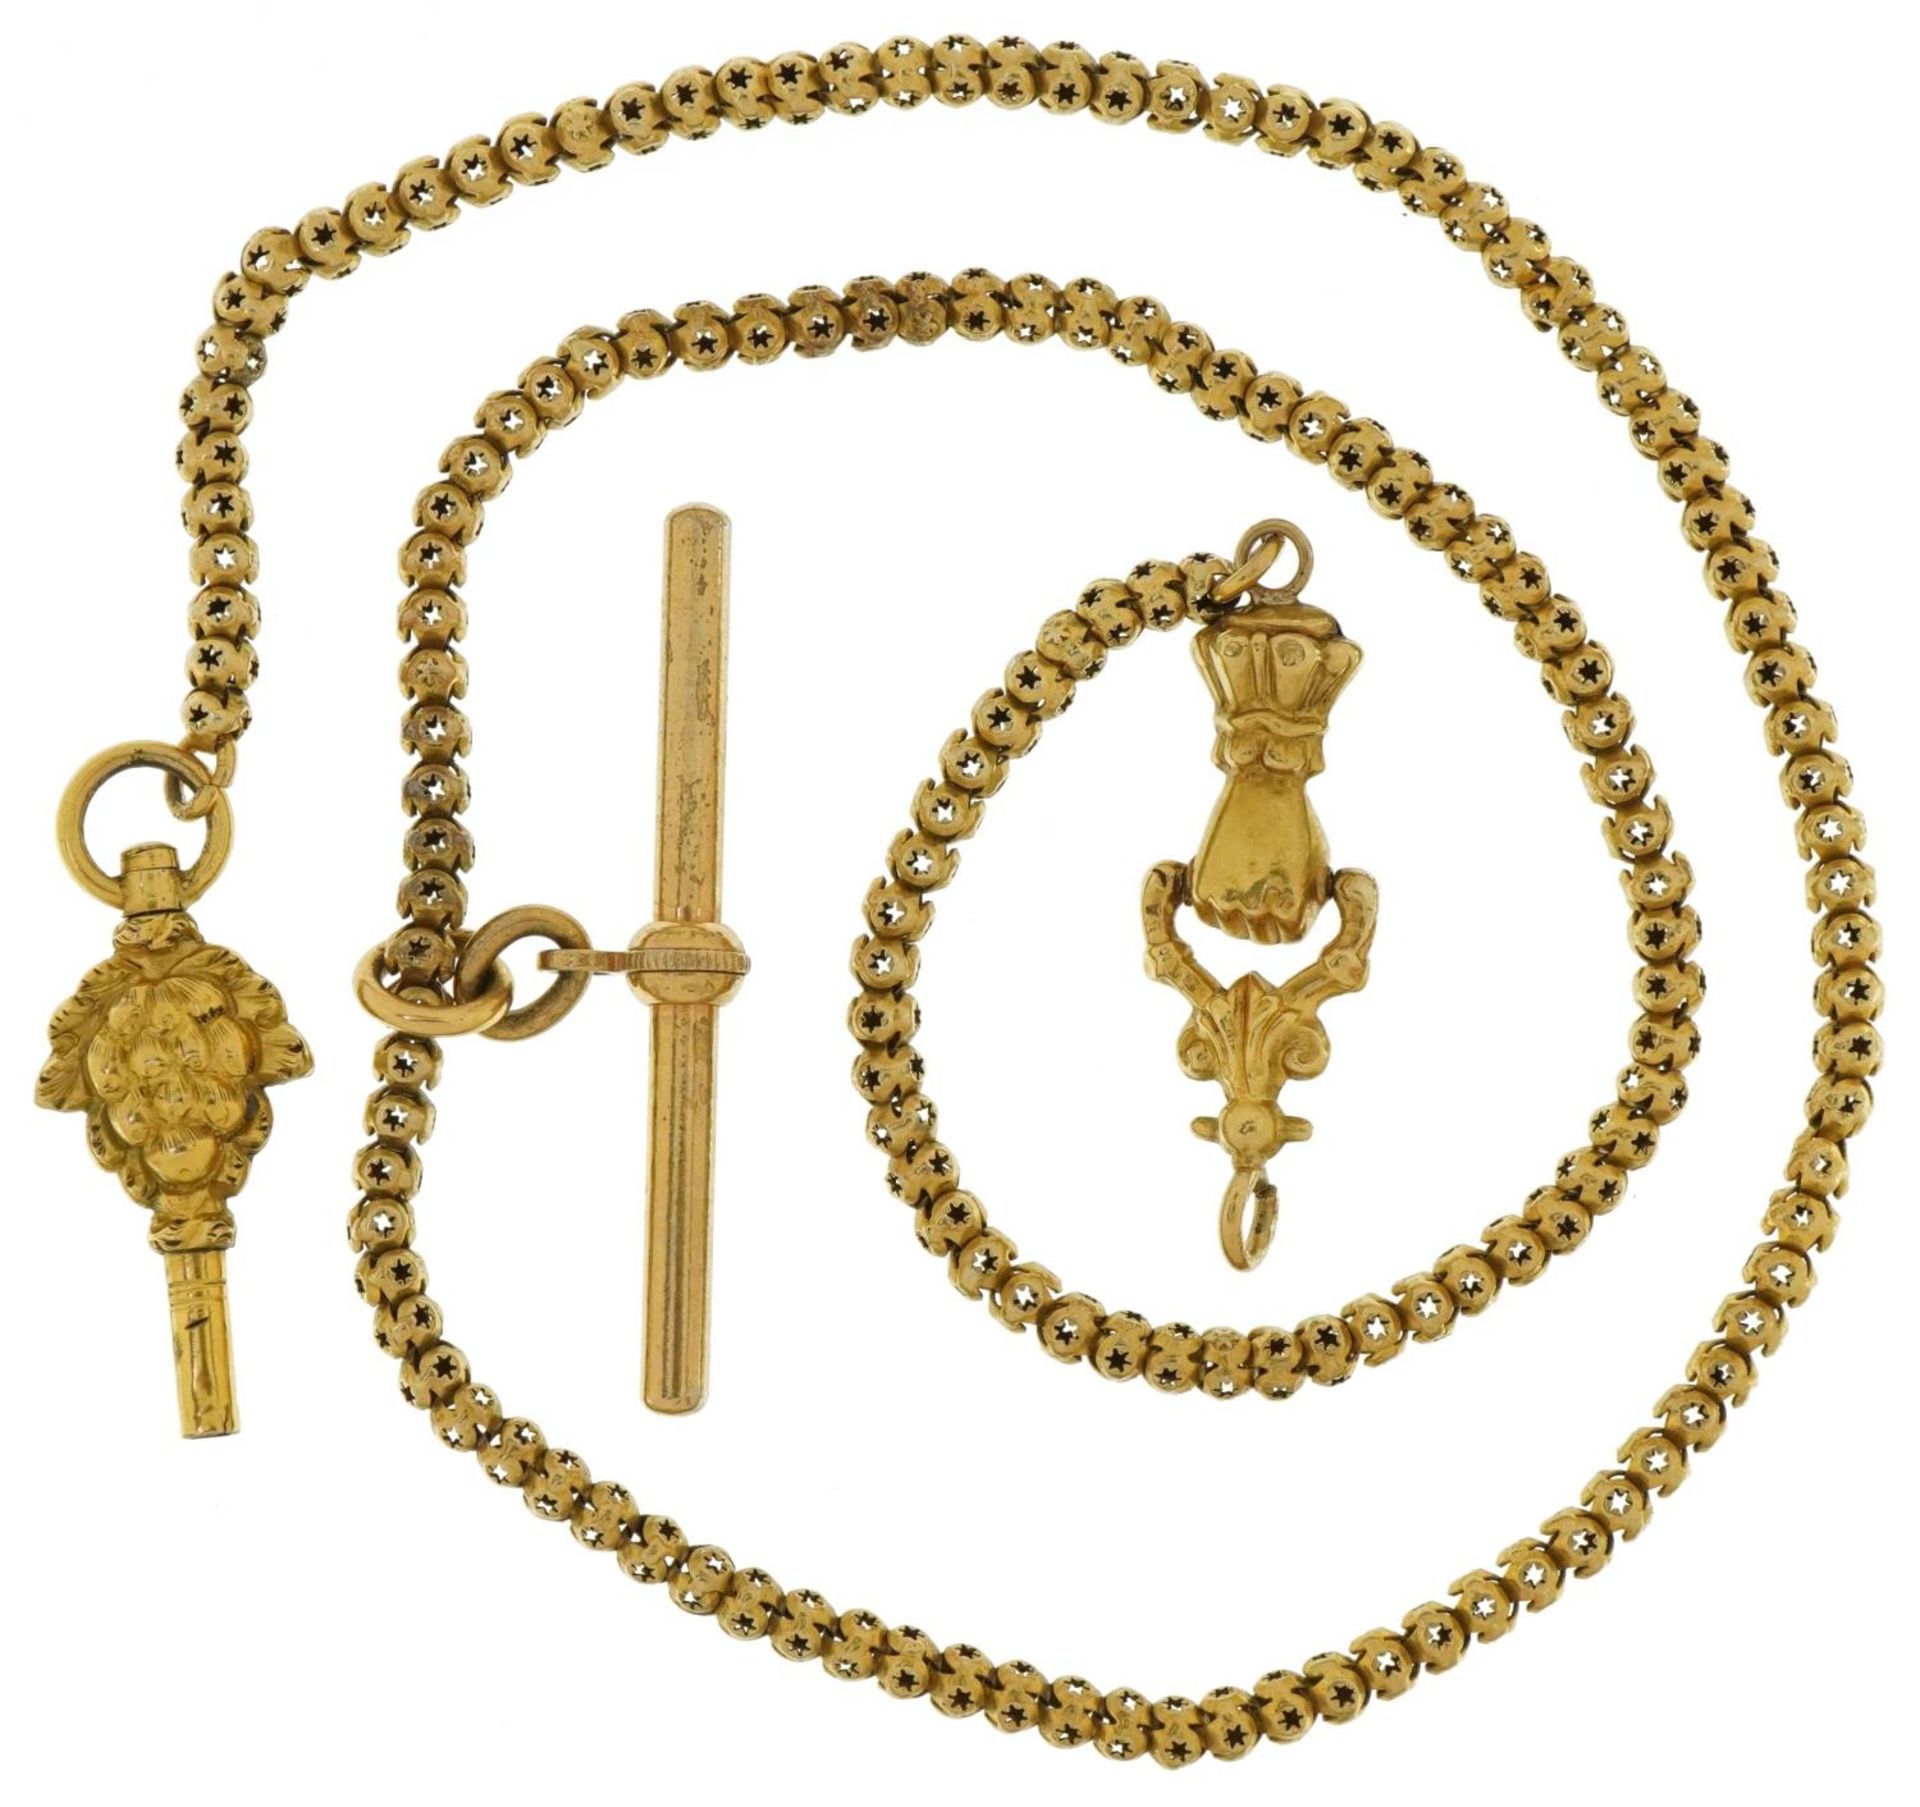 Antique unmarked gold and yellow metal ball link watch chain with hand design clasp and T bar, the